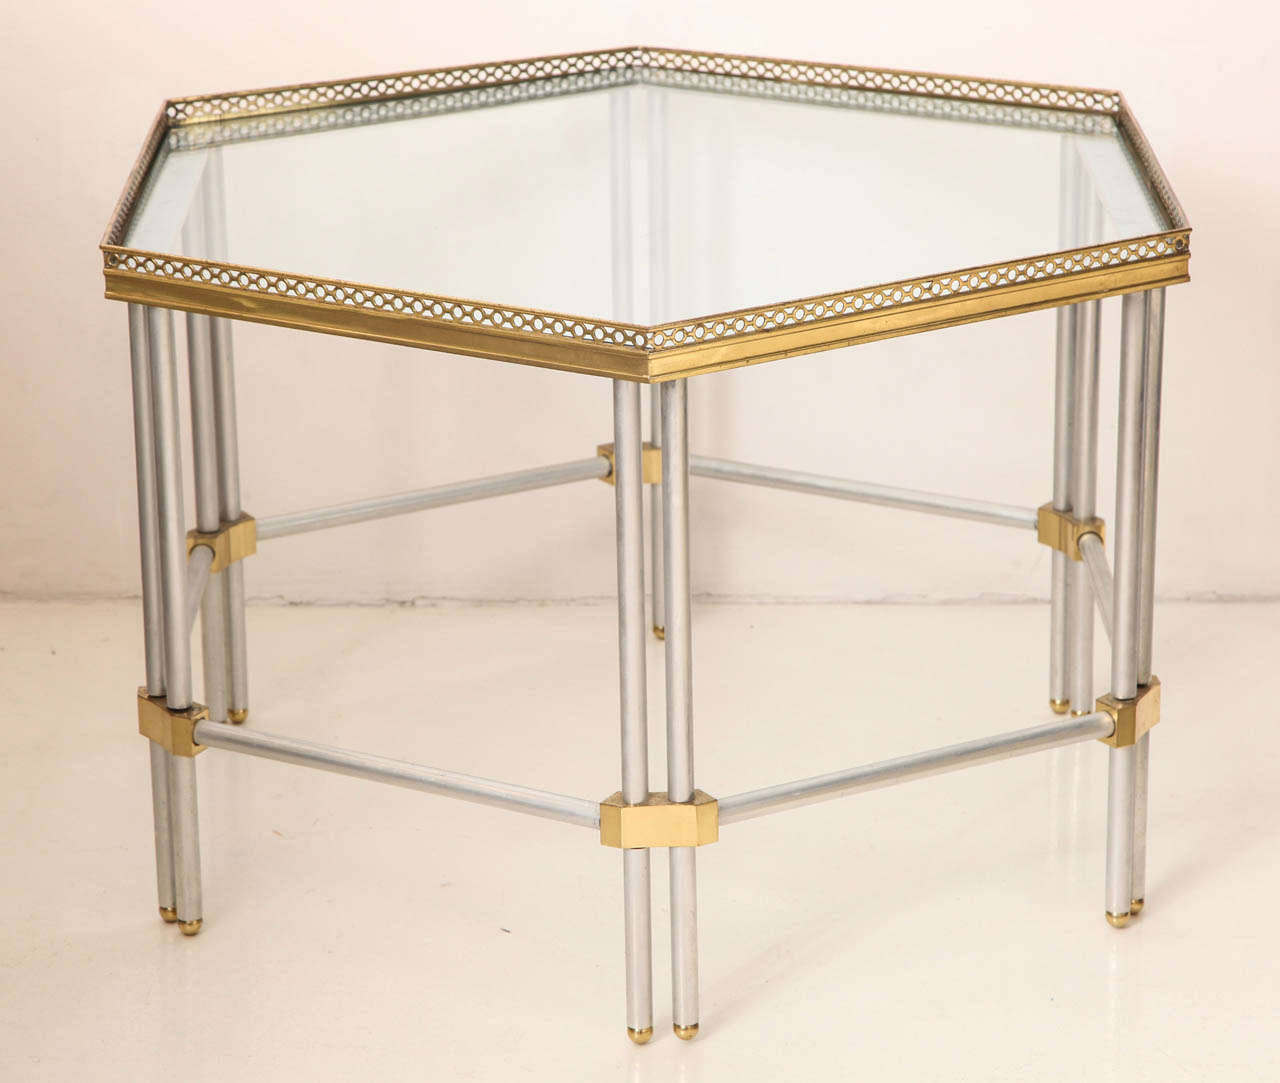 JOHN VESEY (1925-1992)
Hexagonal low table in aluminum with brass accents. 
The glass top is surrounded by a pierced decorative edge. 
American, 1965